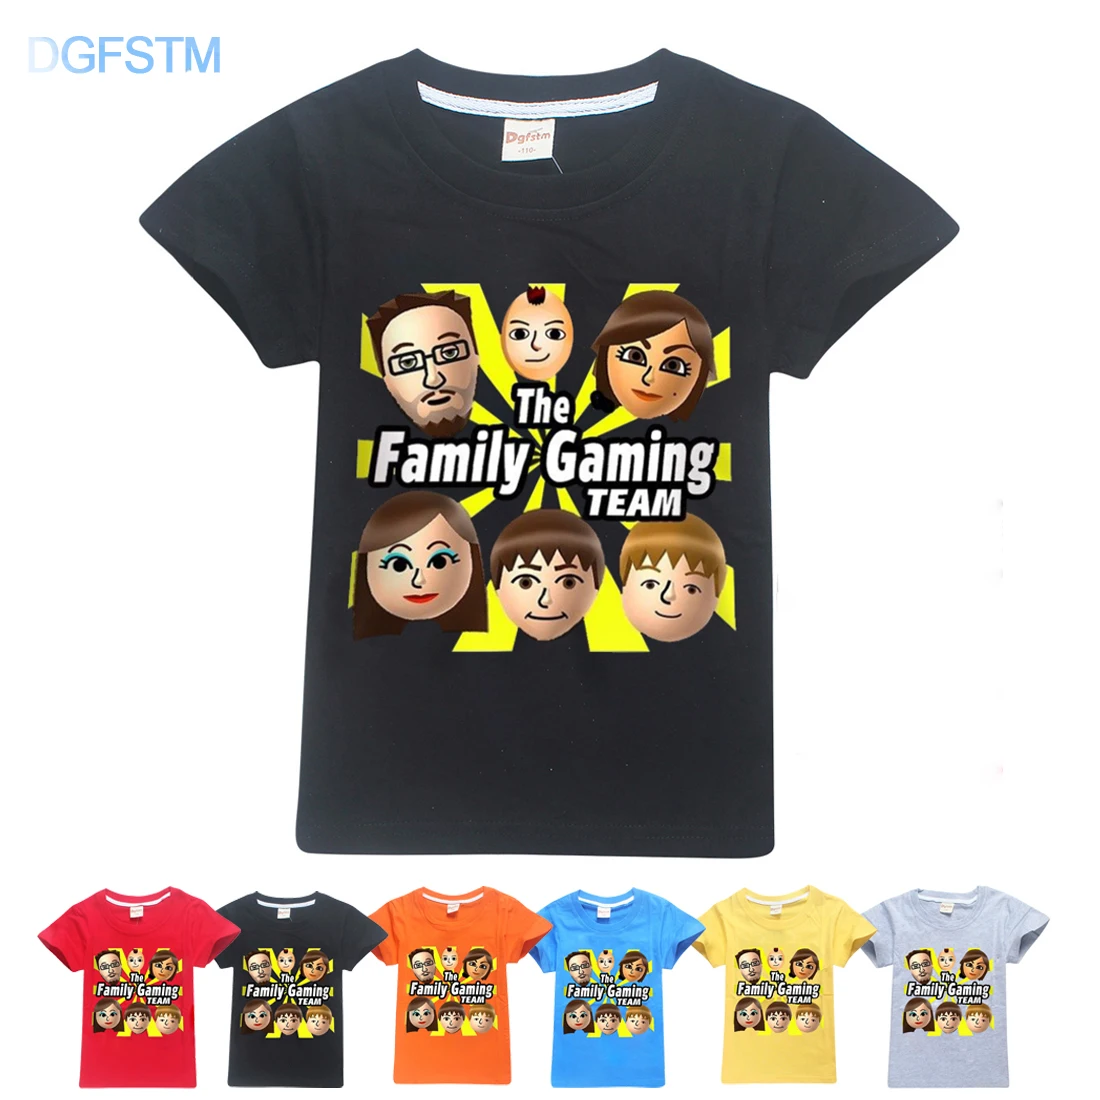 100cotton Summer Fgteev Faces Kids T Shirts For Boys Girls Tops Tees Youth Youtube Family Gaming Duddy Fgtv Teens Roblox T Shirt T Shirt For Boys Kids T Shirtt Shirts For Aliexpress - toddler roblox t shirt sale